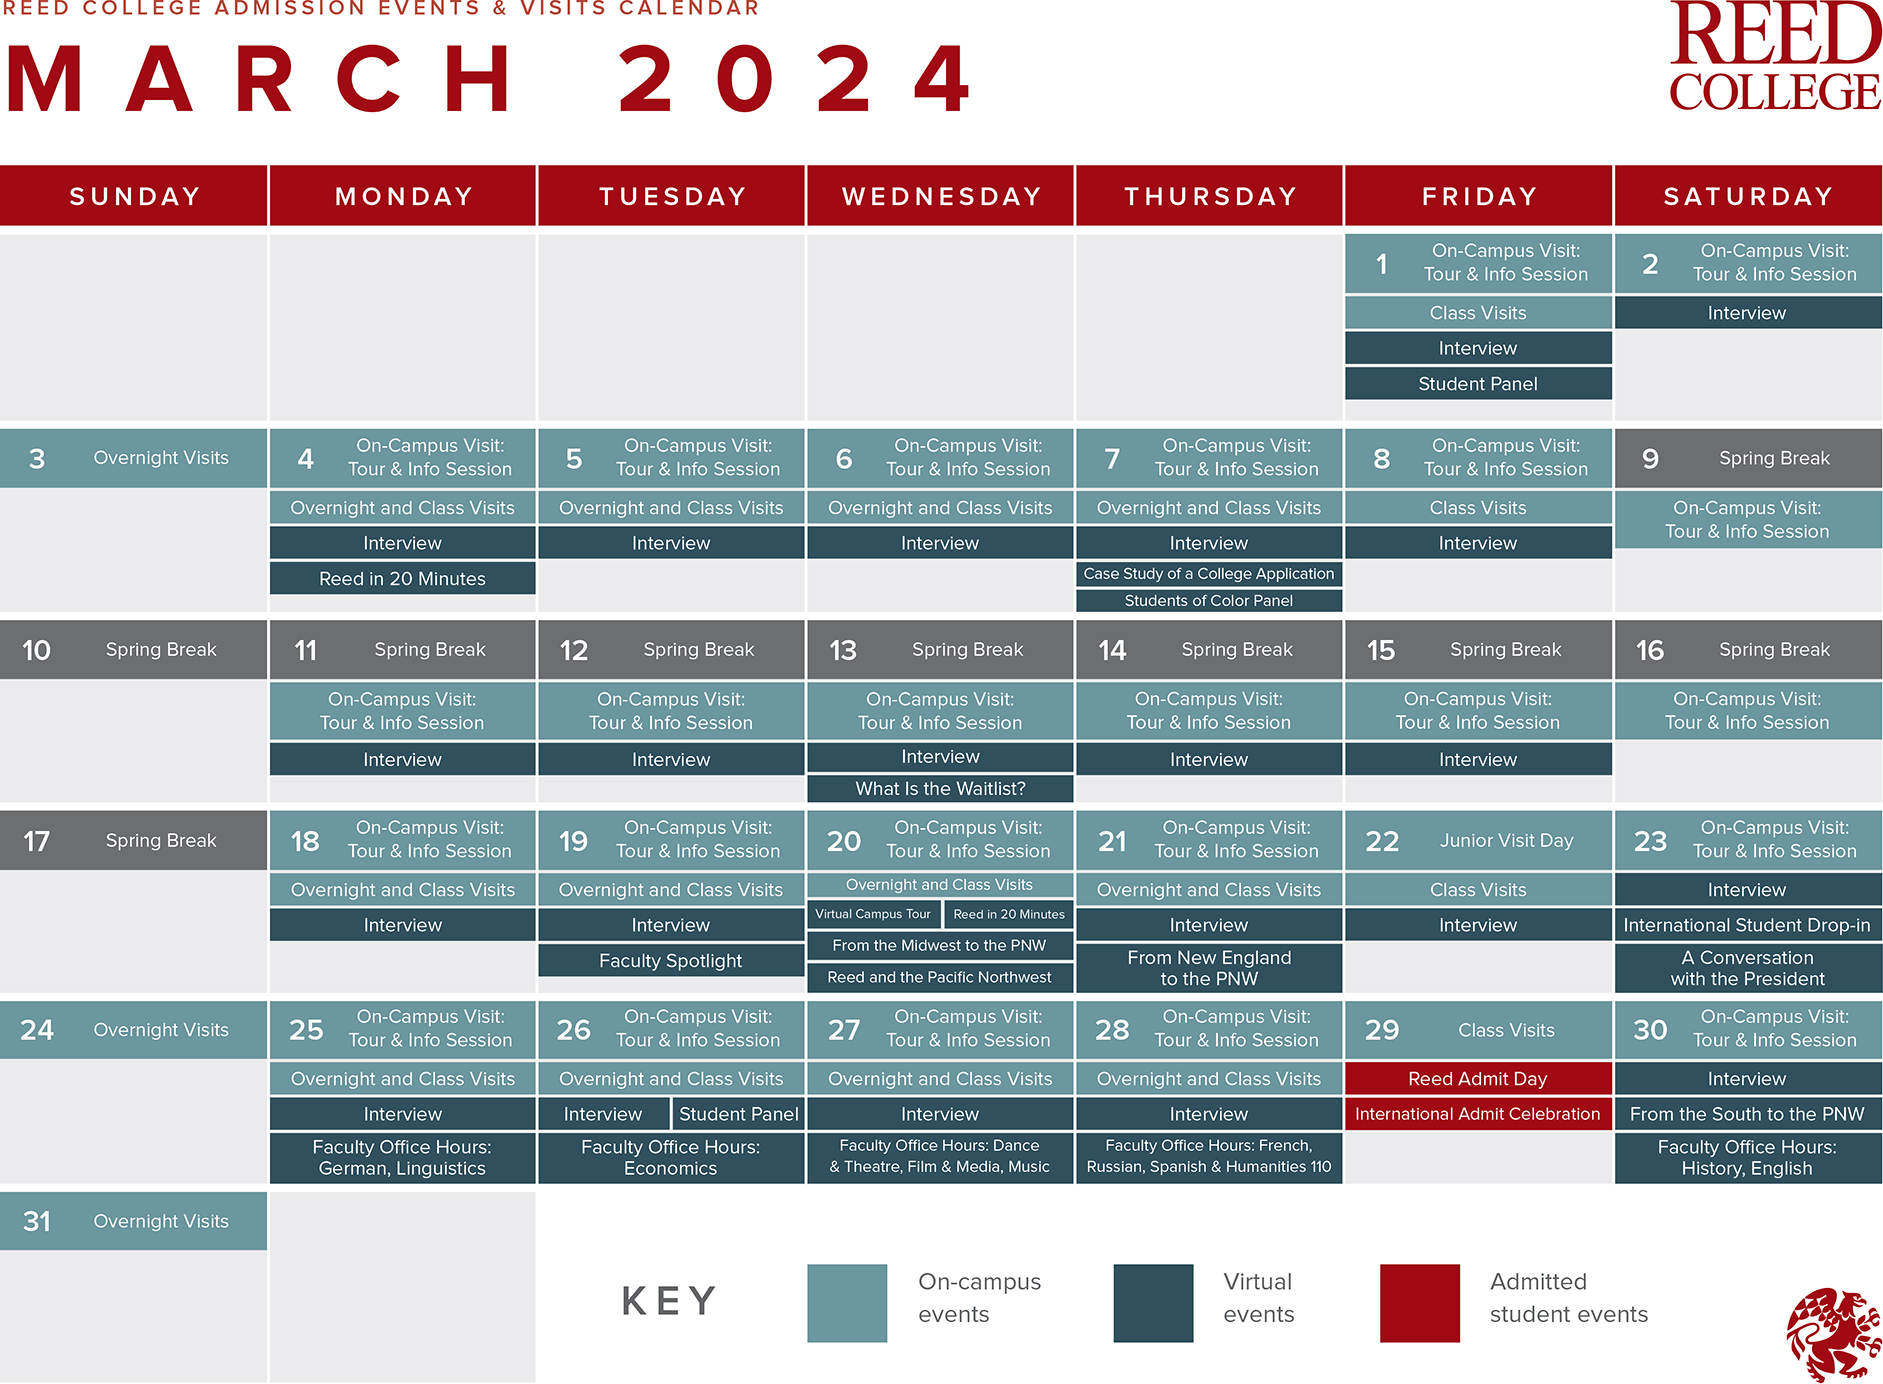 March 2024 calendar of events